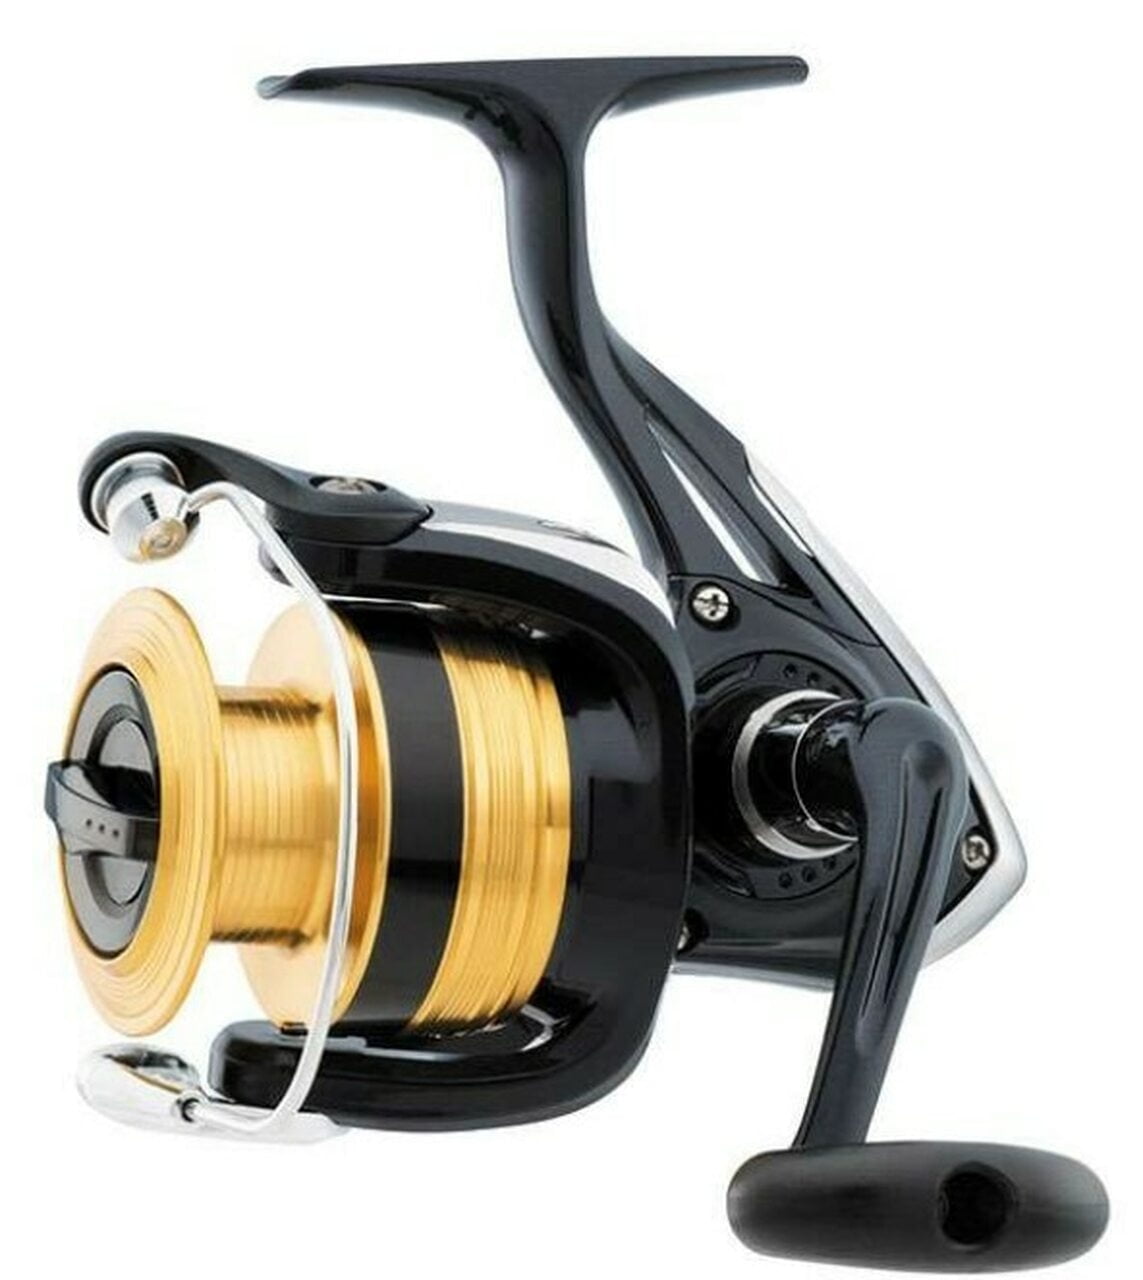 B-250 Spool Details about   NEW DAIWA SPINNING REEL PART 